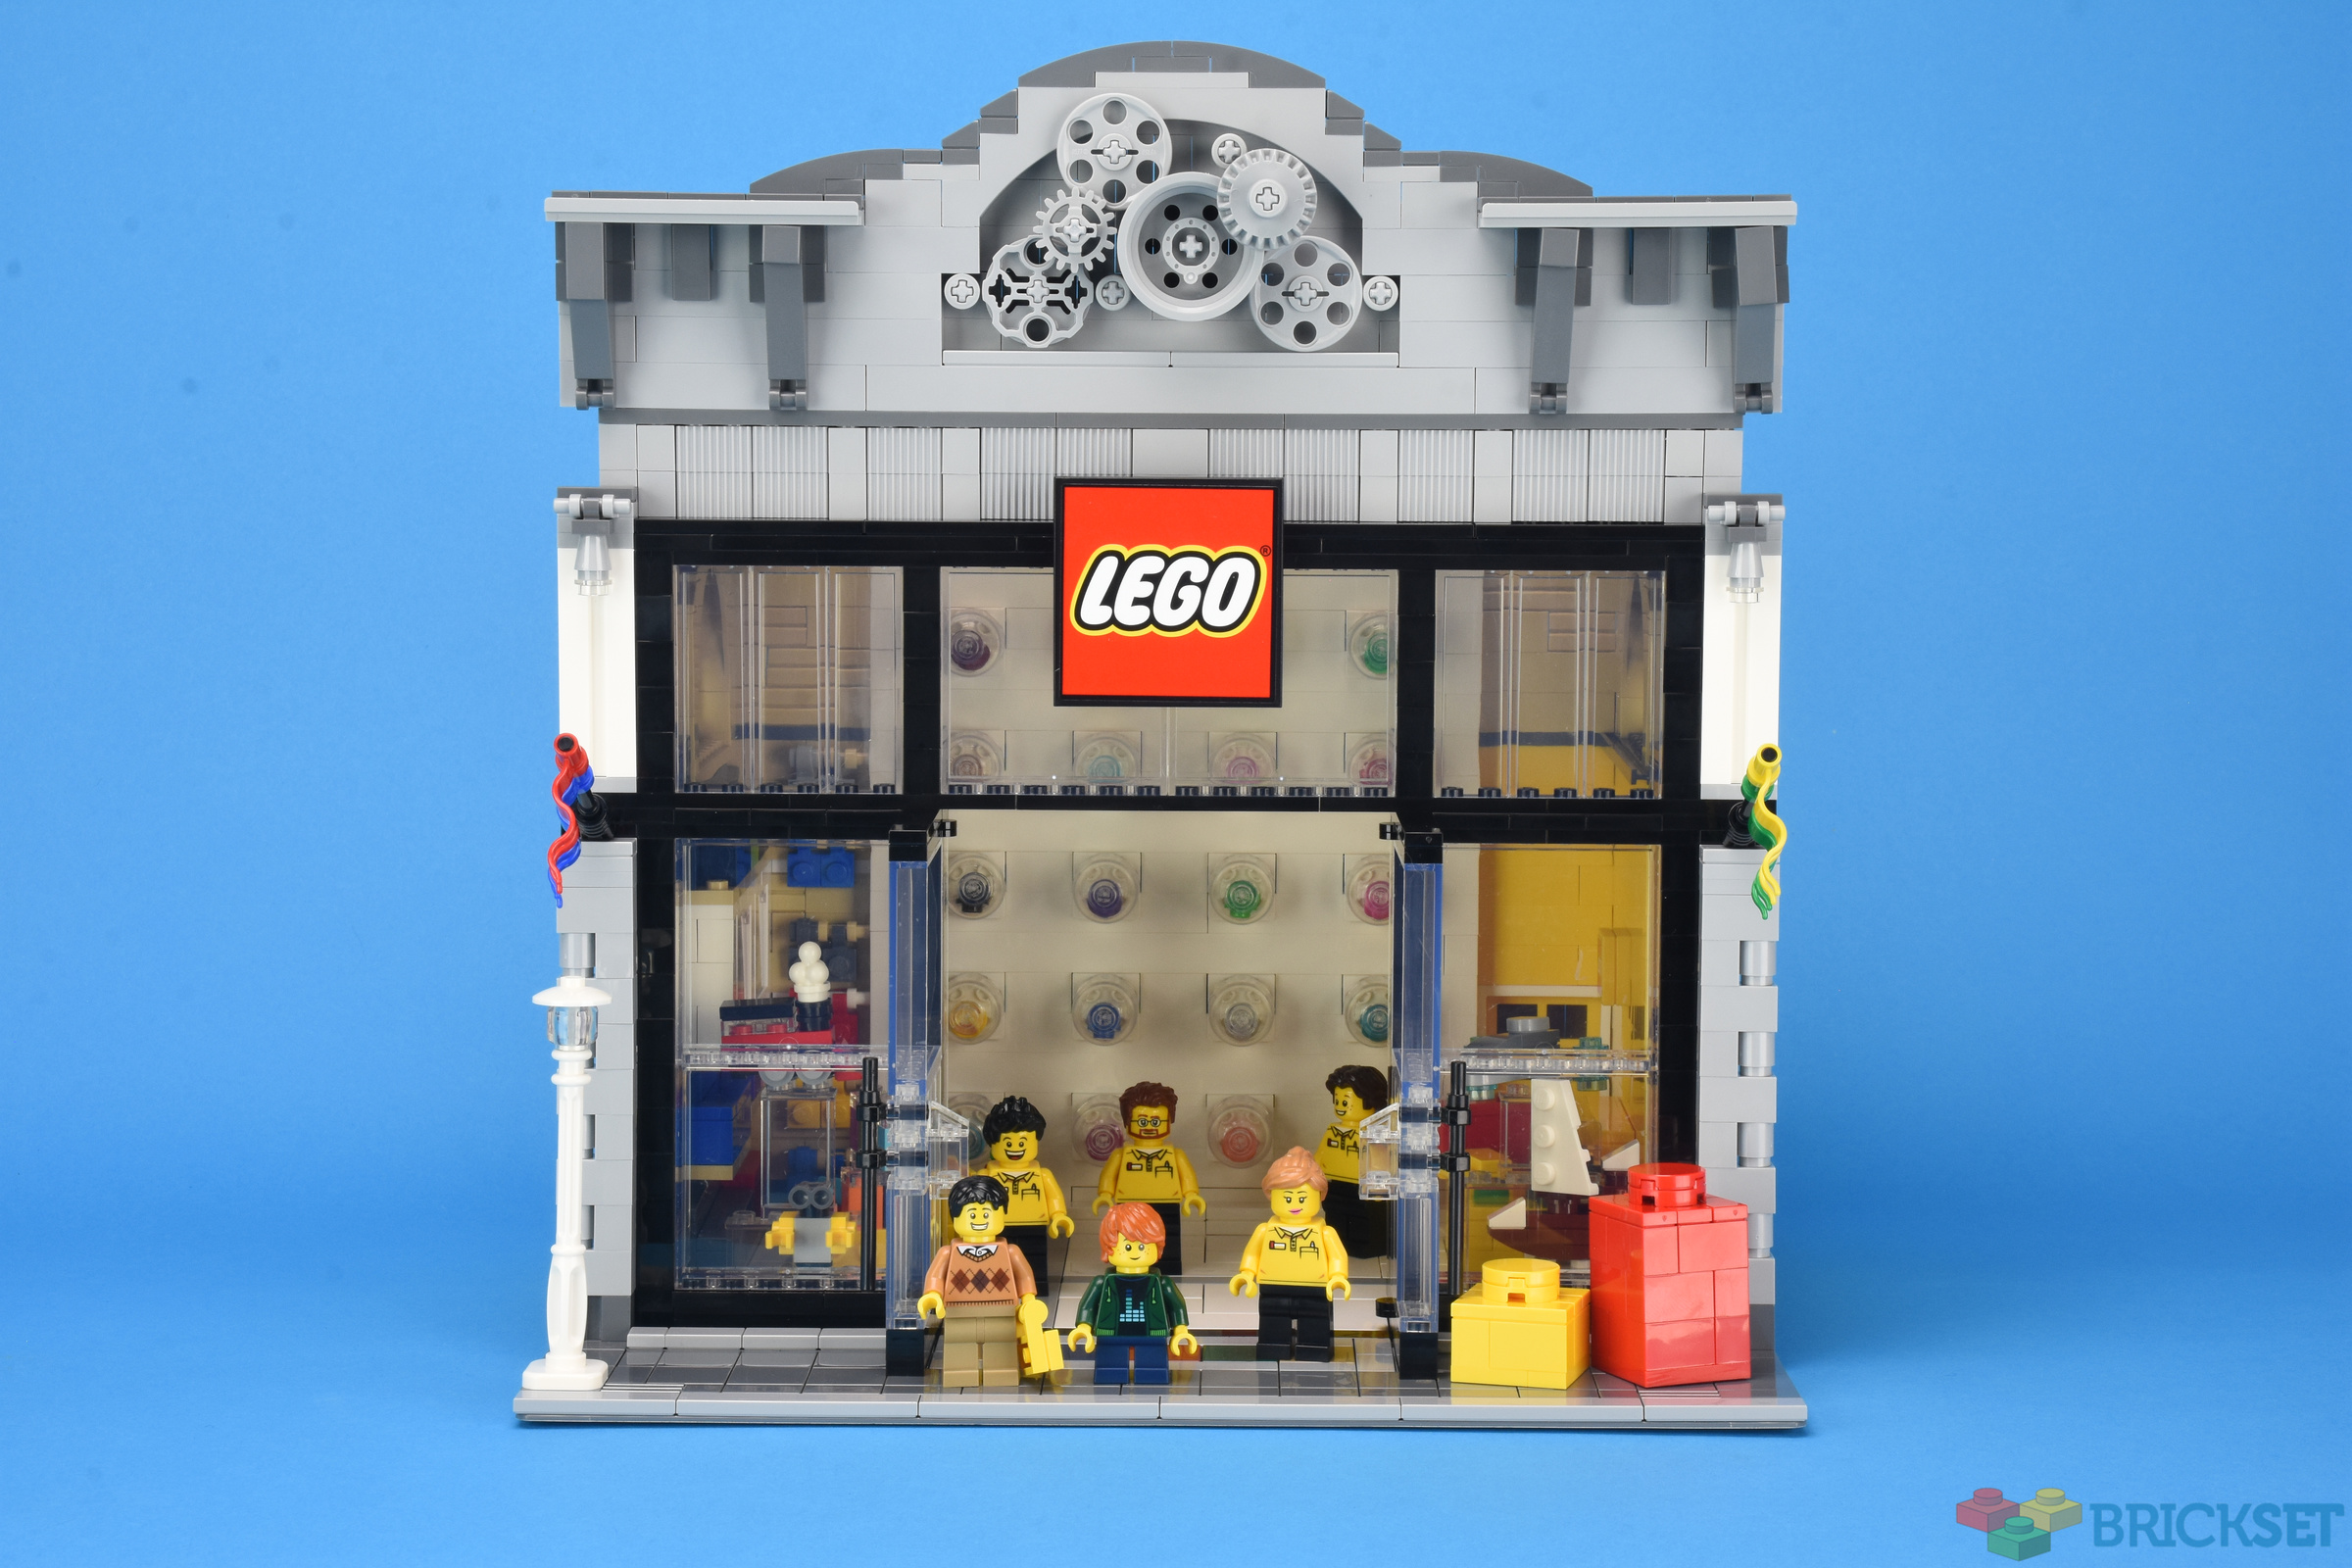 Canada's Largest LEGO Store